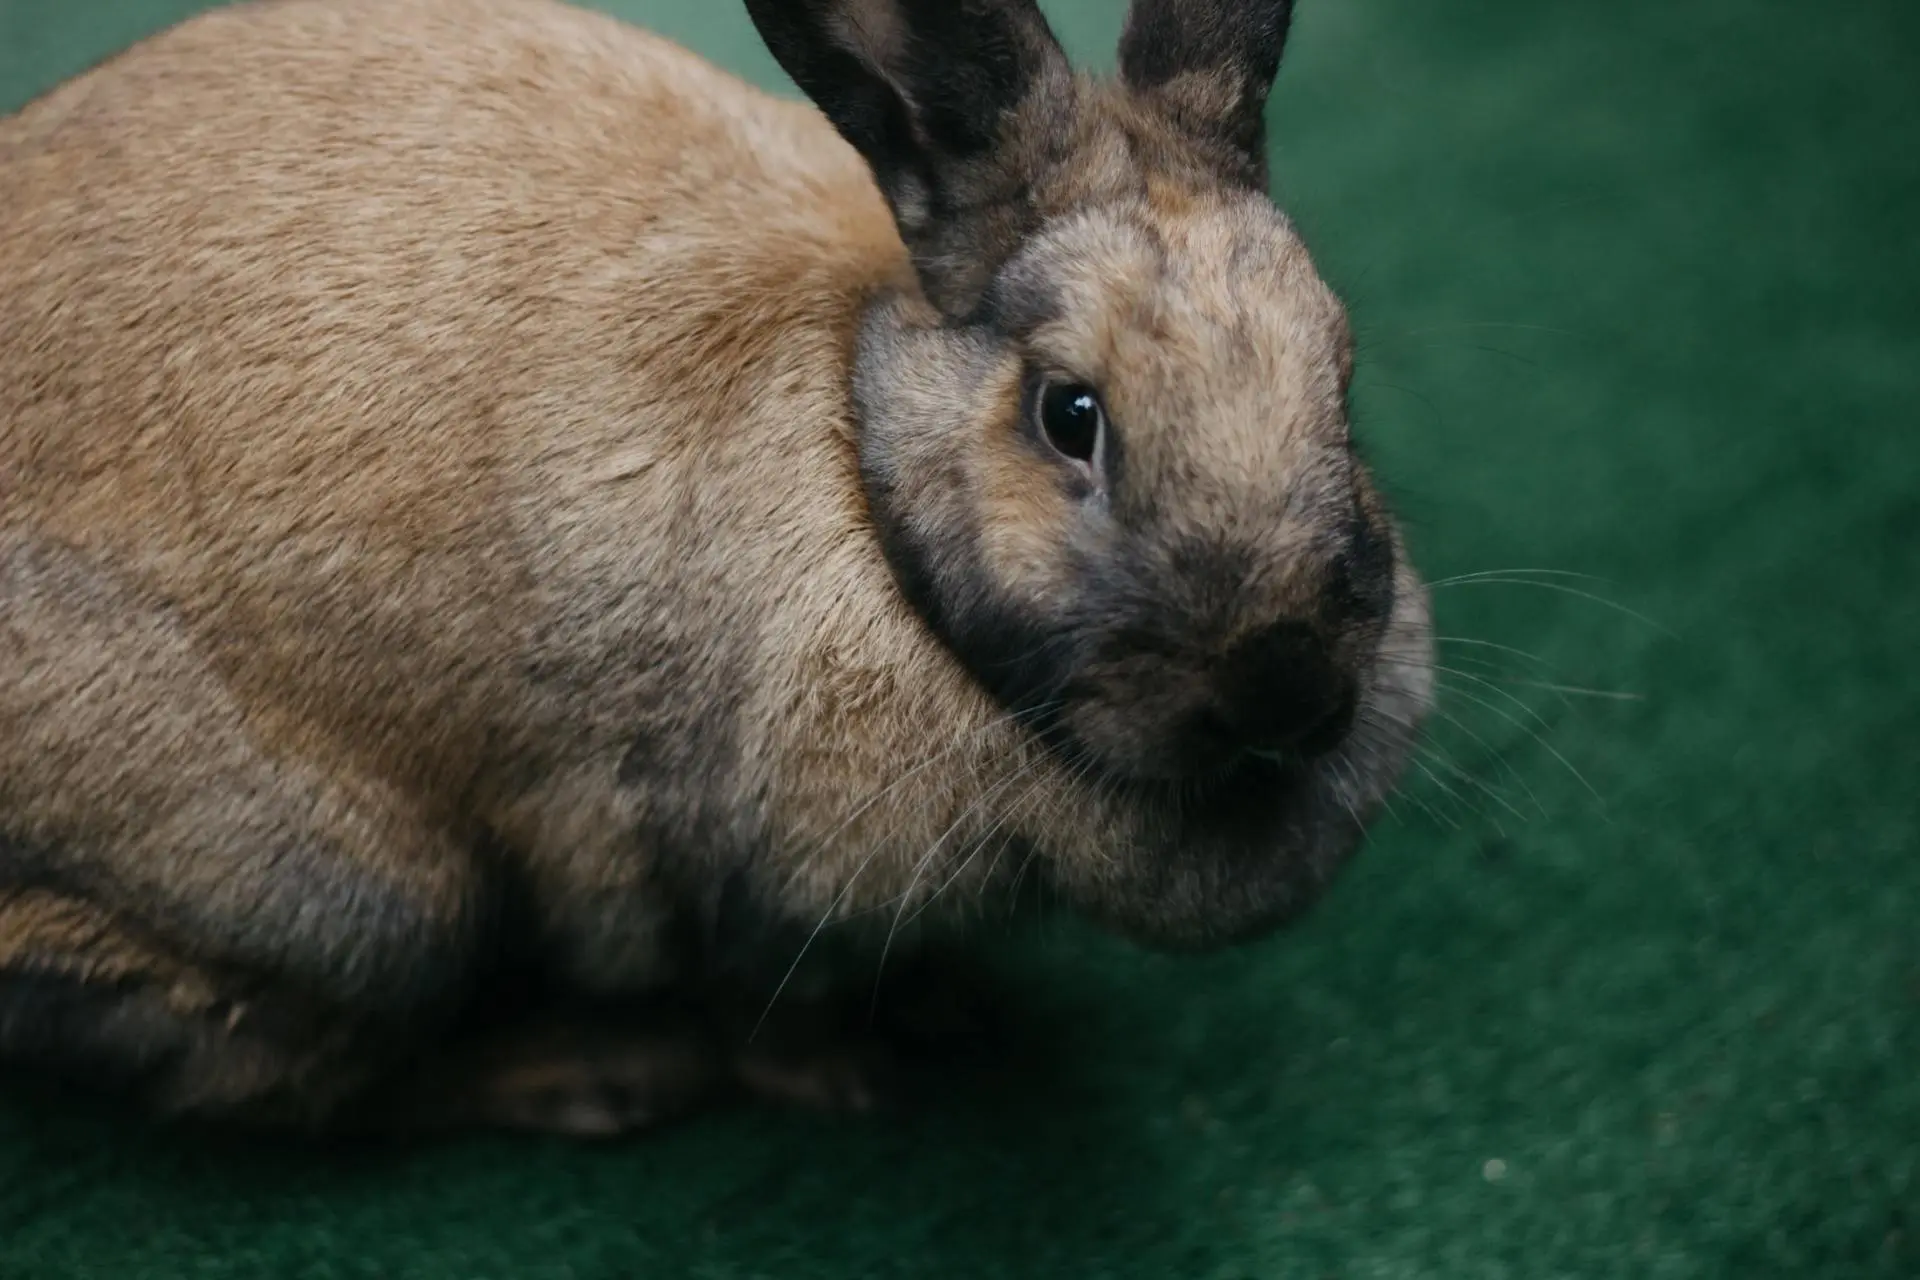 17 Ways To Know If Your Rabbit Is Sick